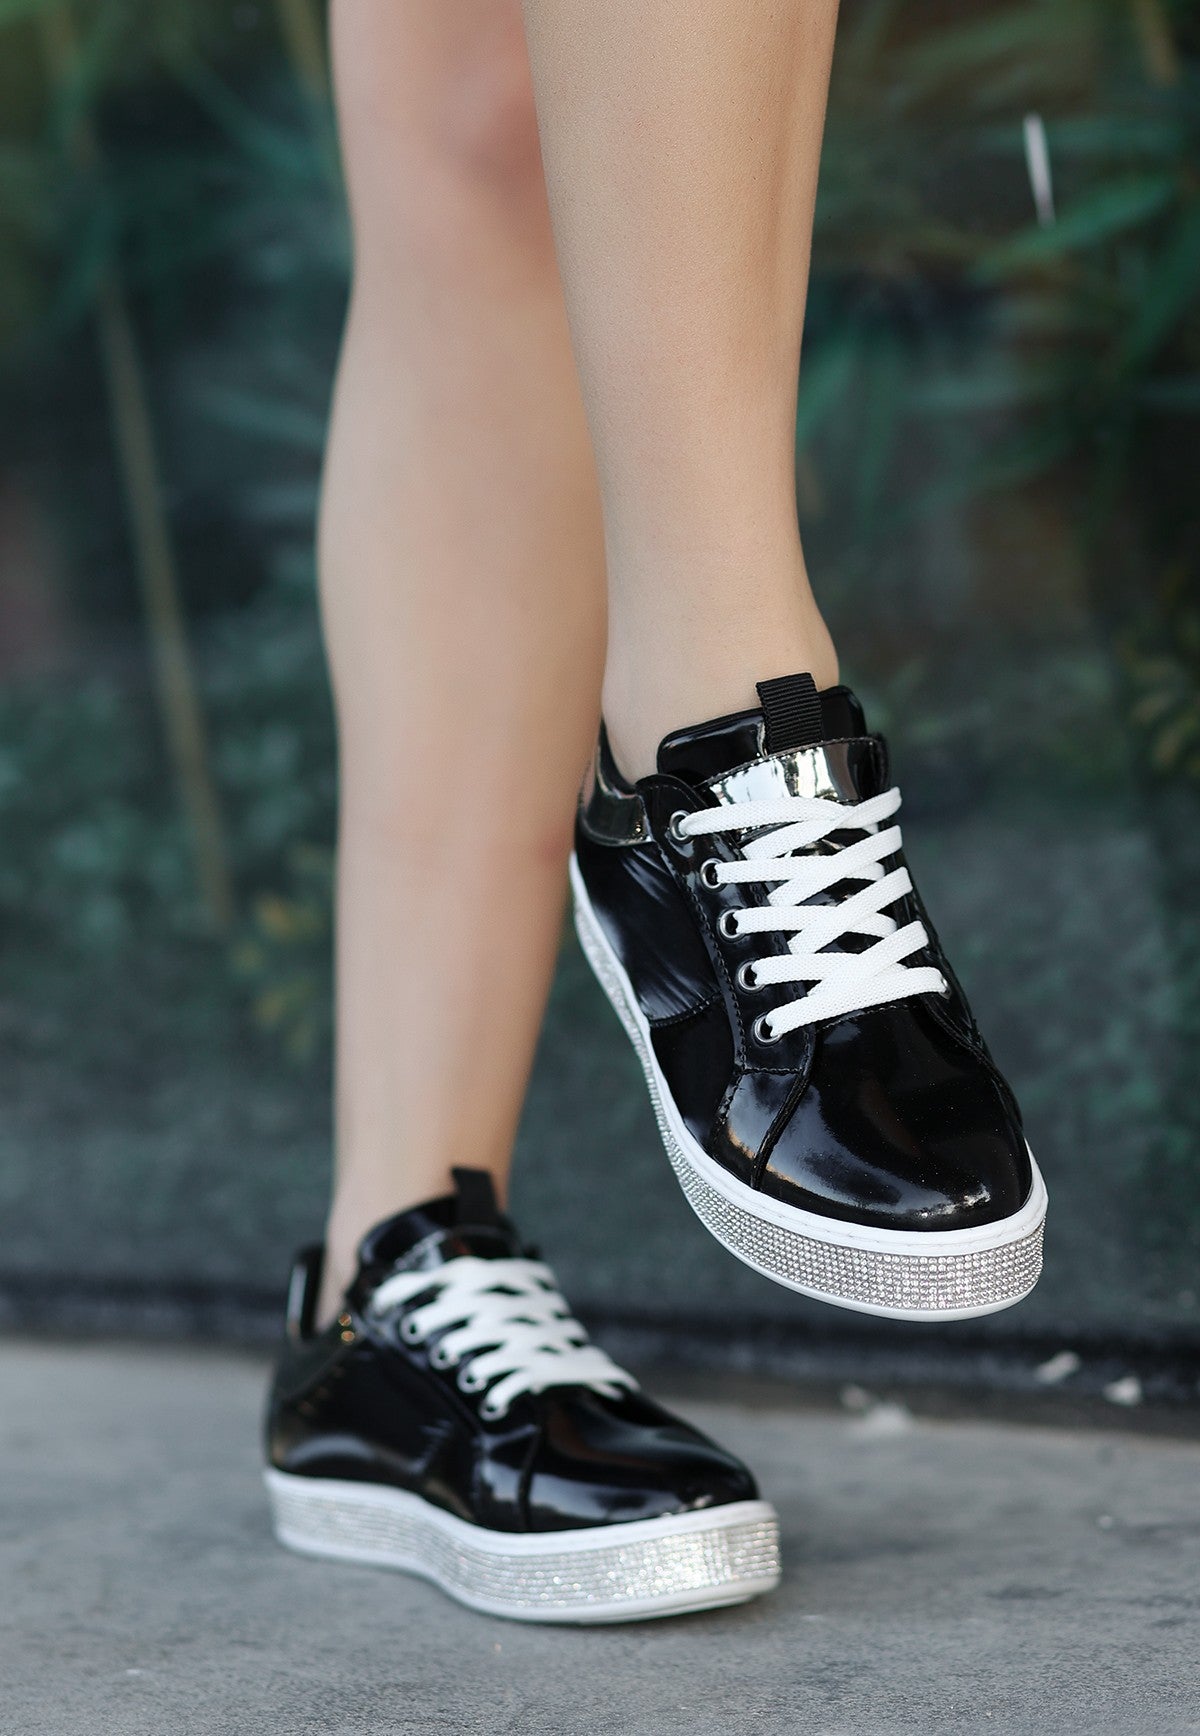 Women's Jeja Black Patent Leather Lace-Up Sports Shoes - STREETMODE ™